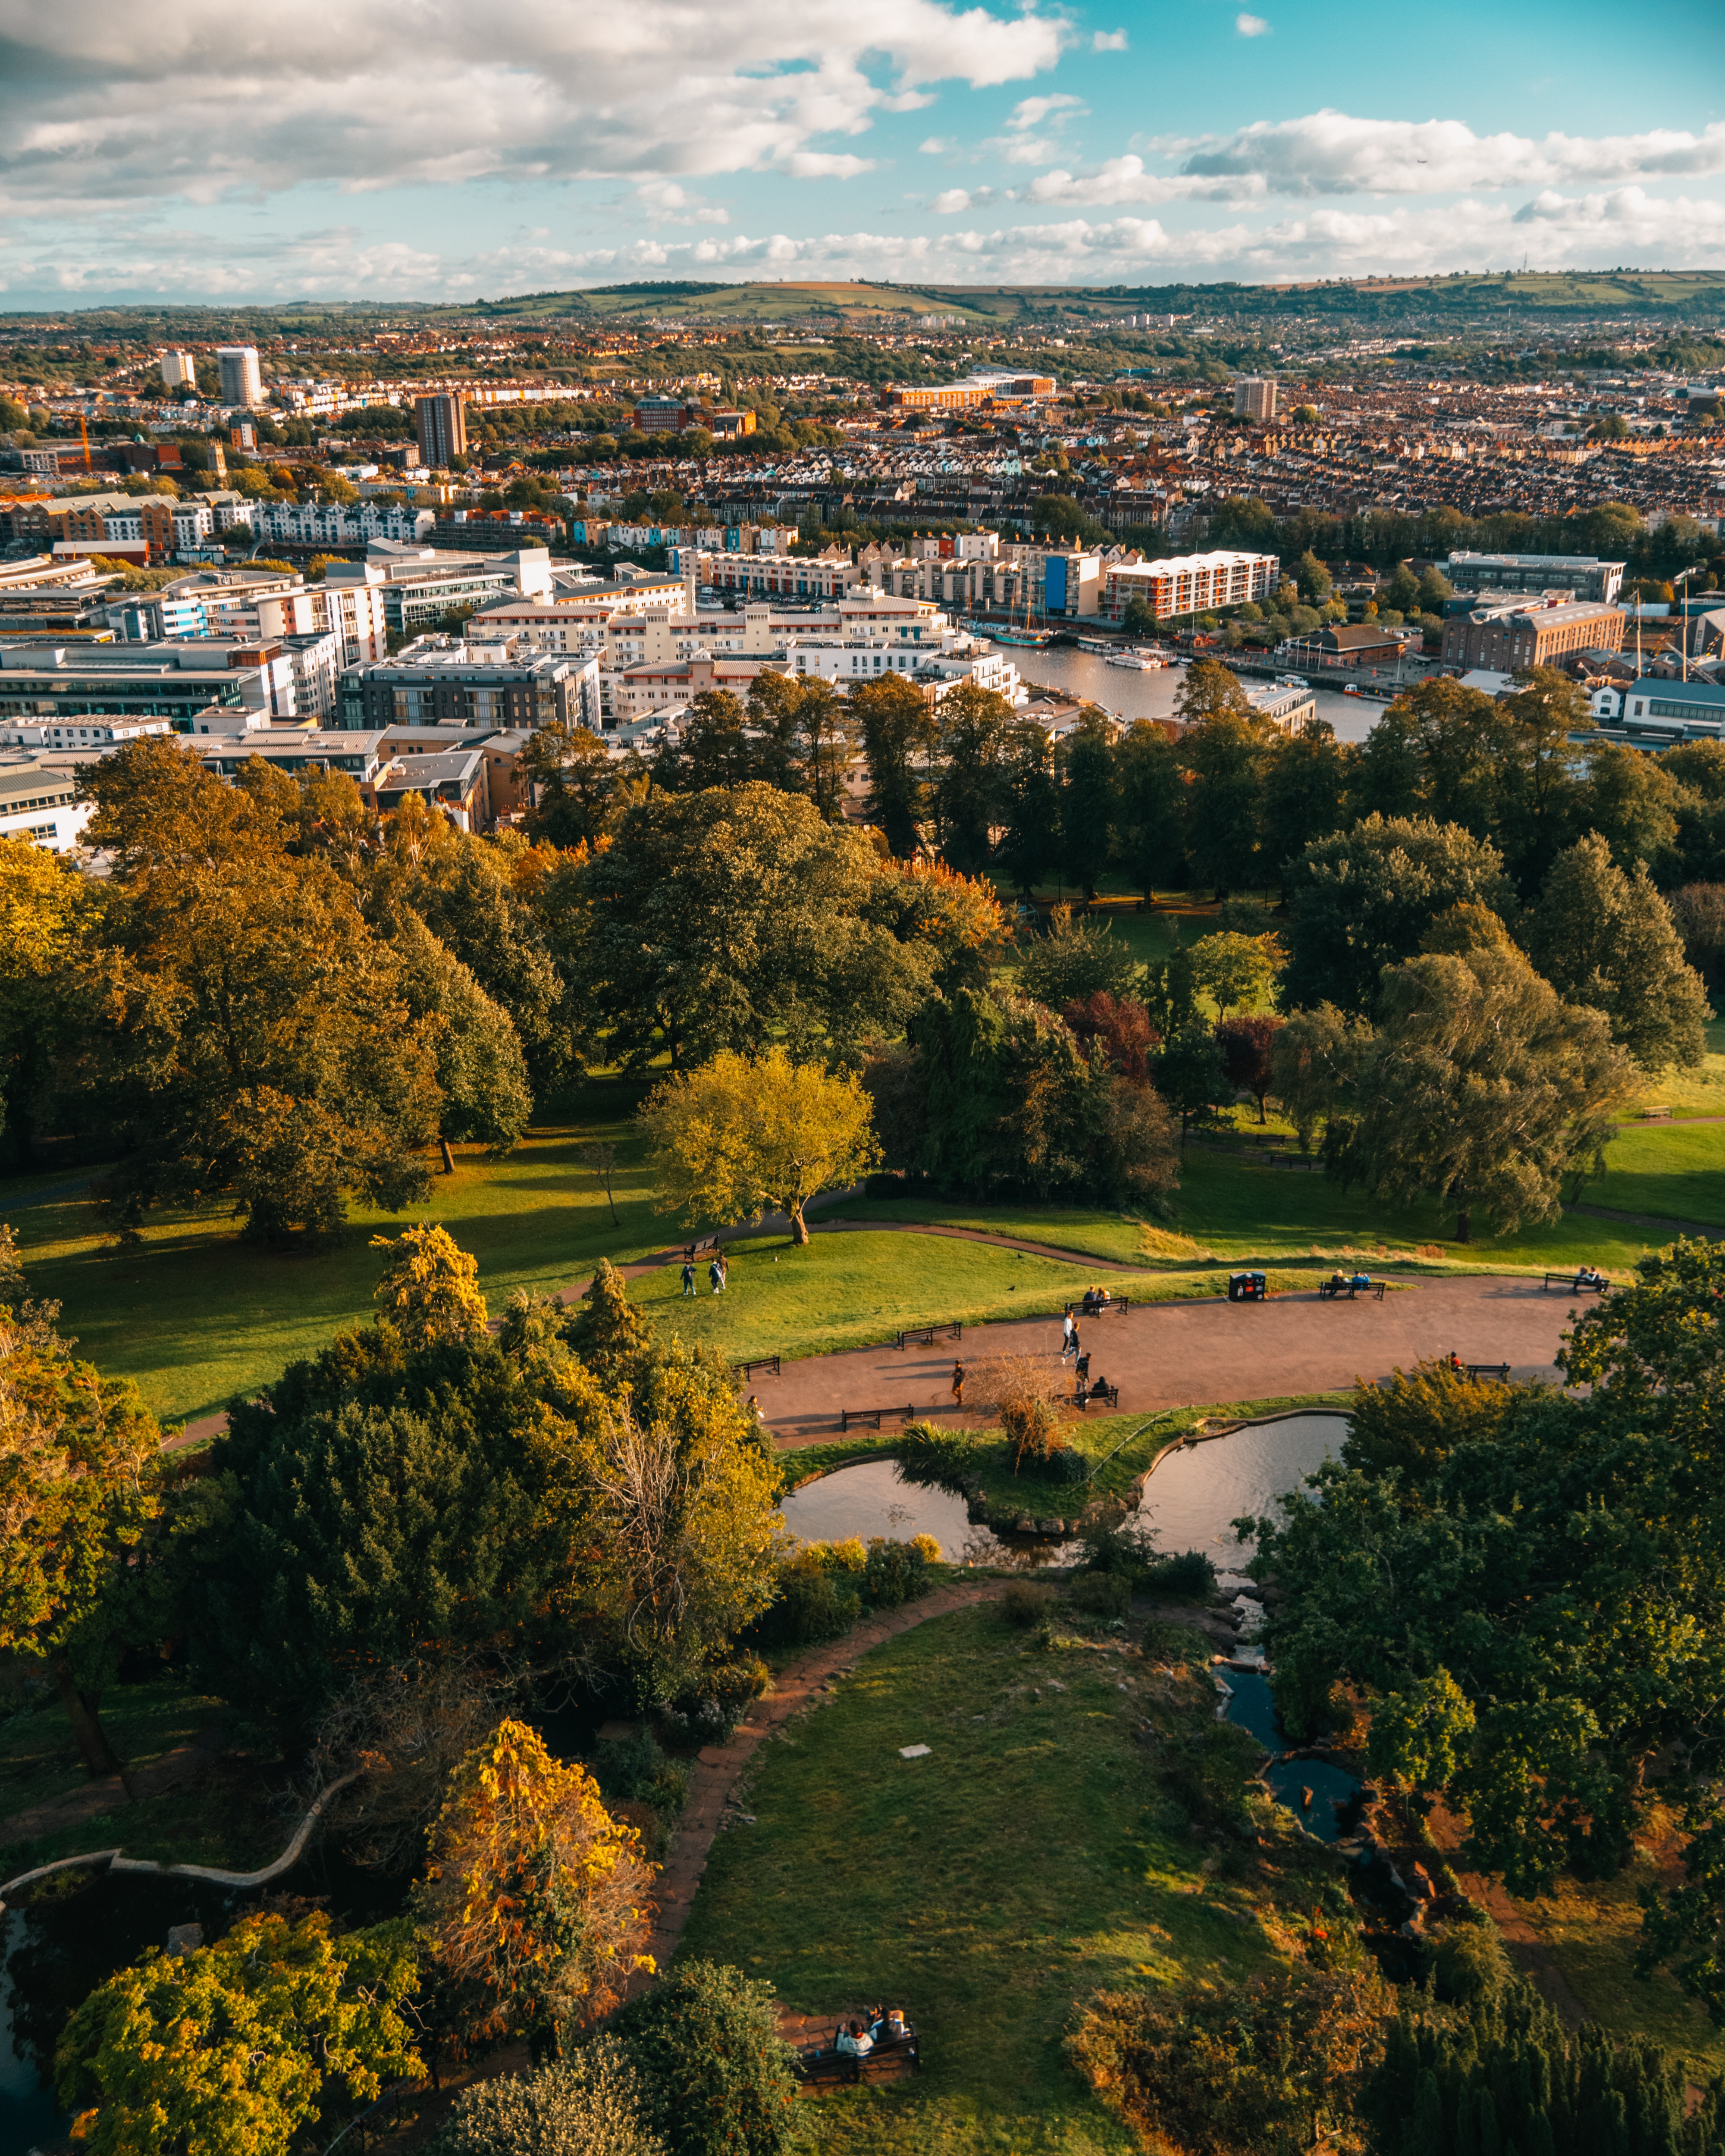 Is Bristol The New London? 3 Reasons For The Rising Interest In This South West England City